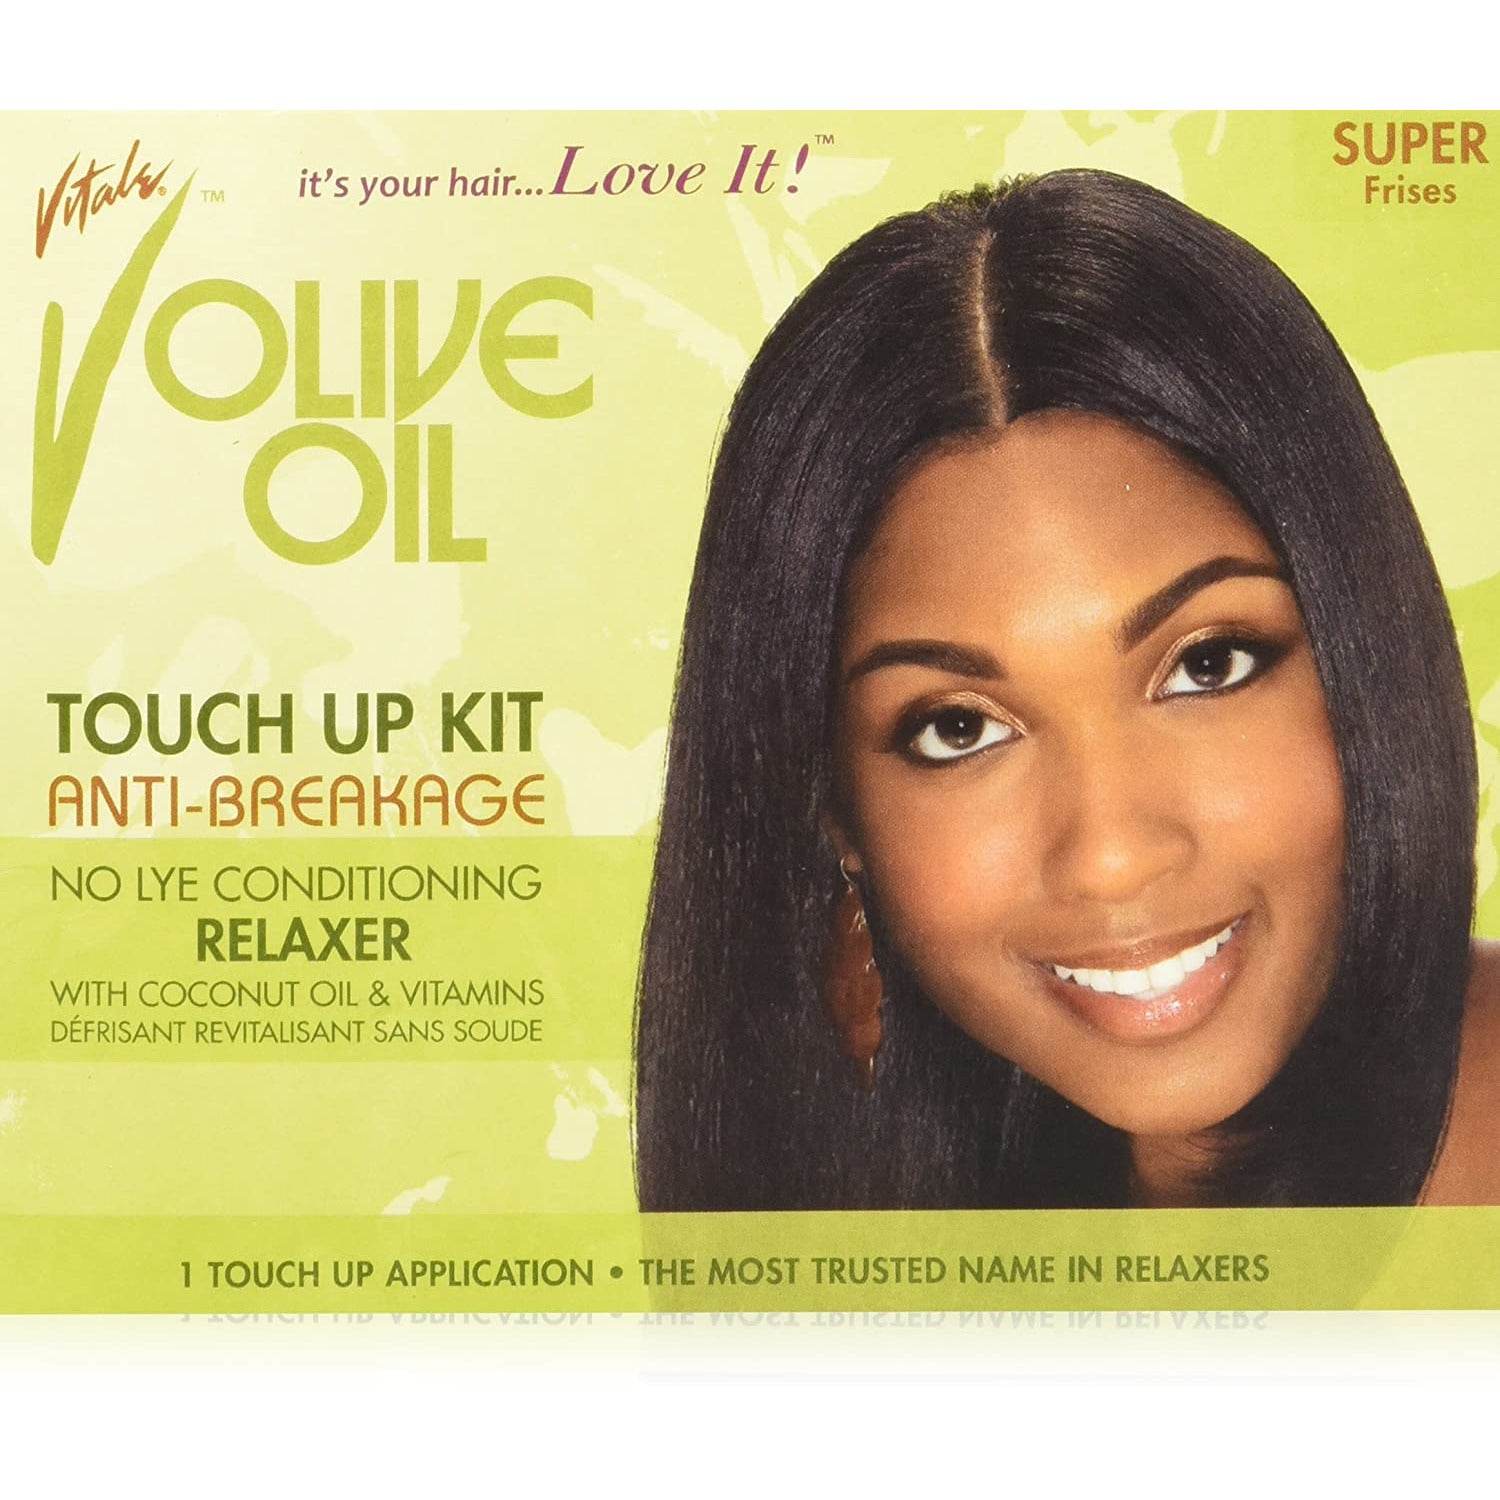 4th Ave Market: Vitale Olive Oil Touch Up Kit Conditioning No-lye Relaxer System